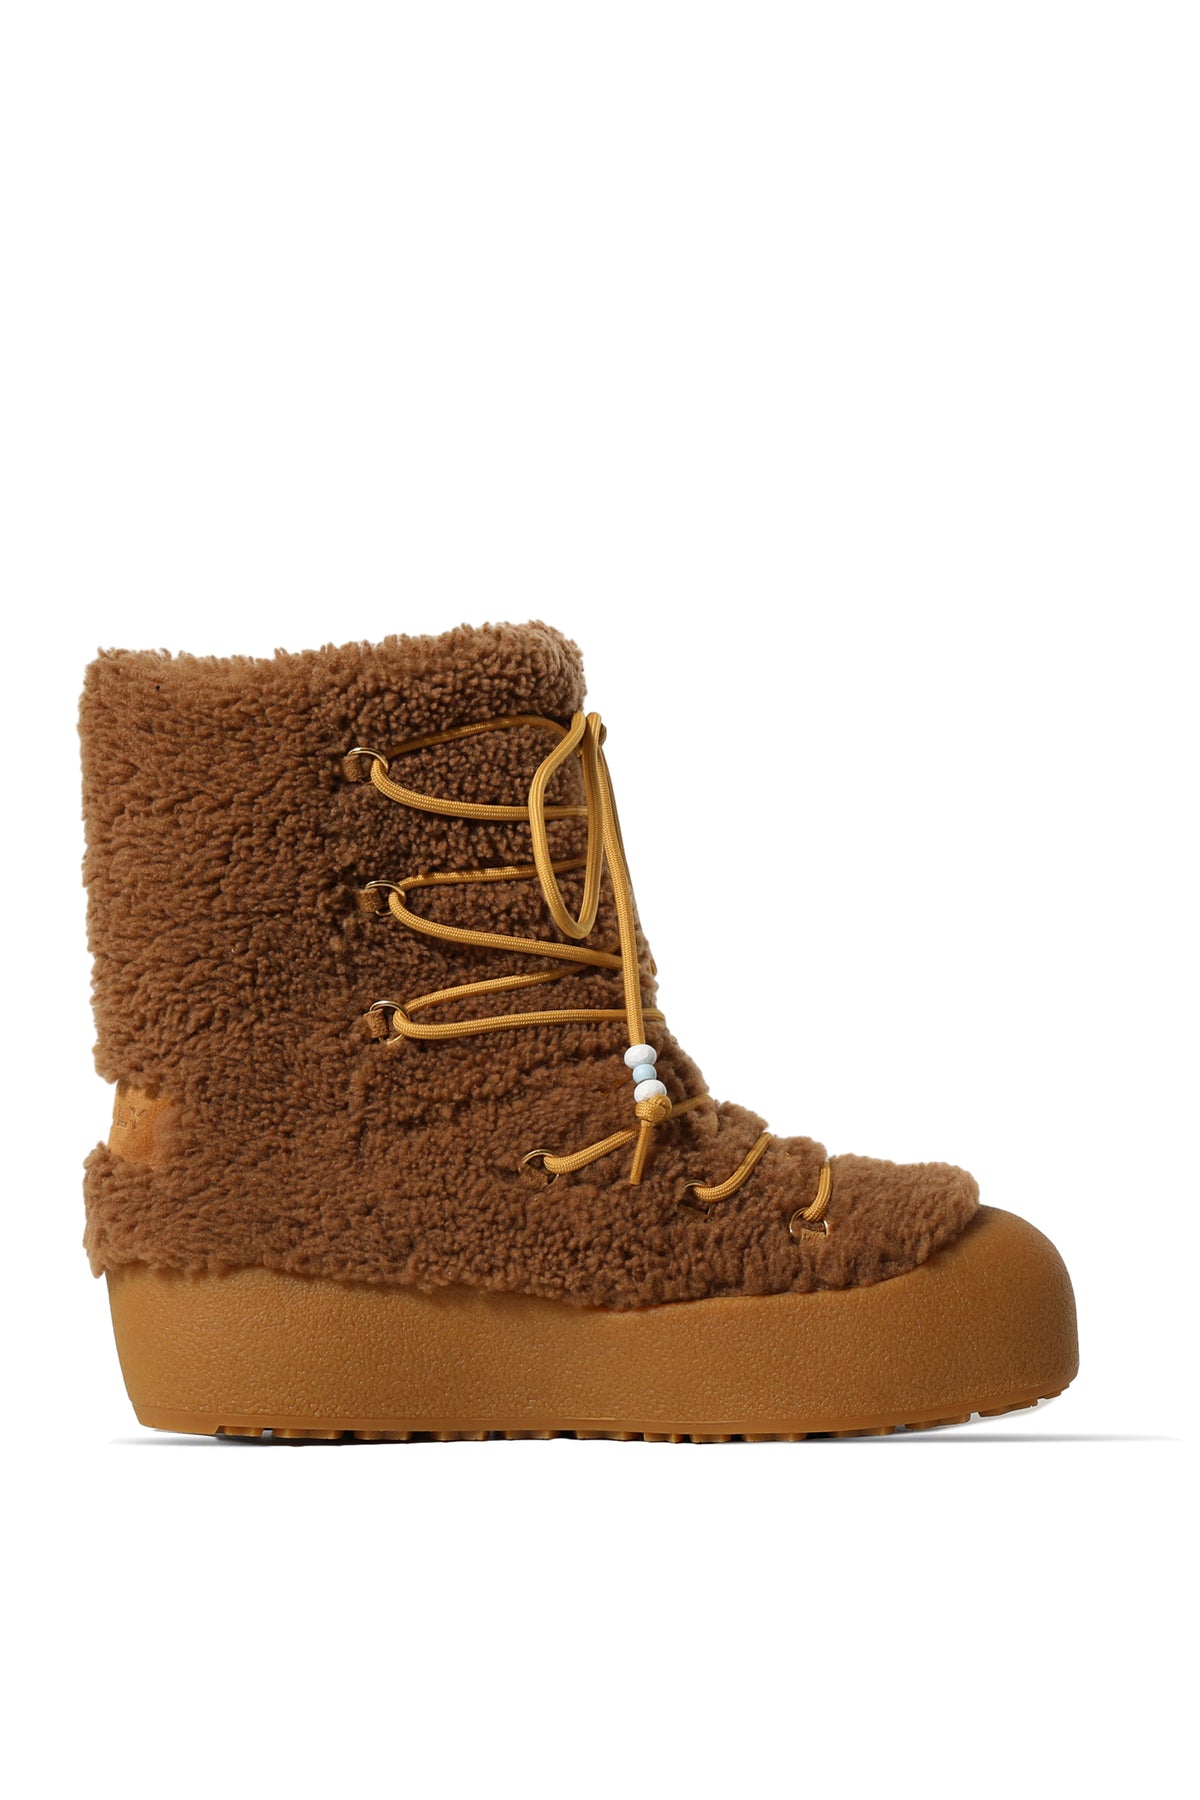 SHEARLING BOOTS / CAMEL